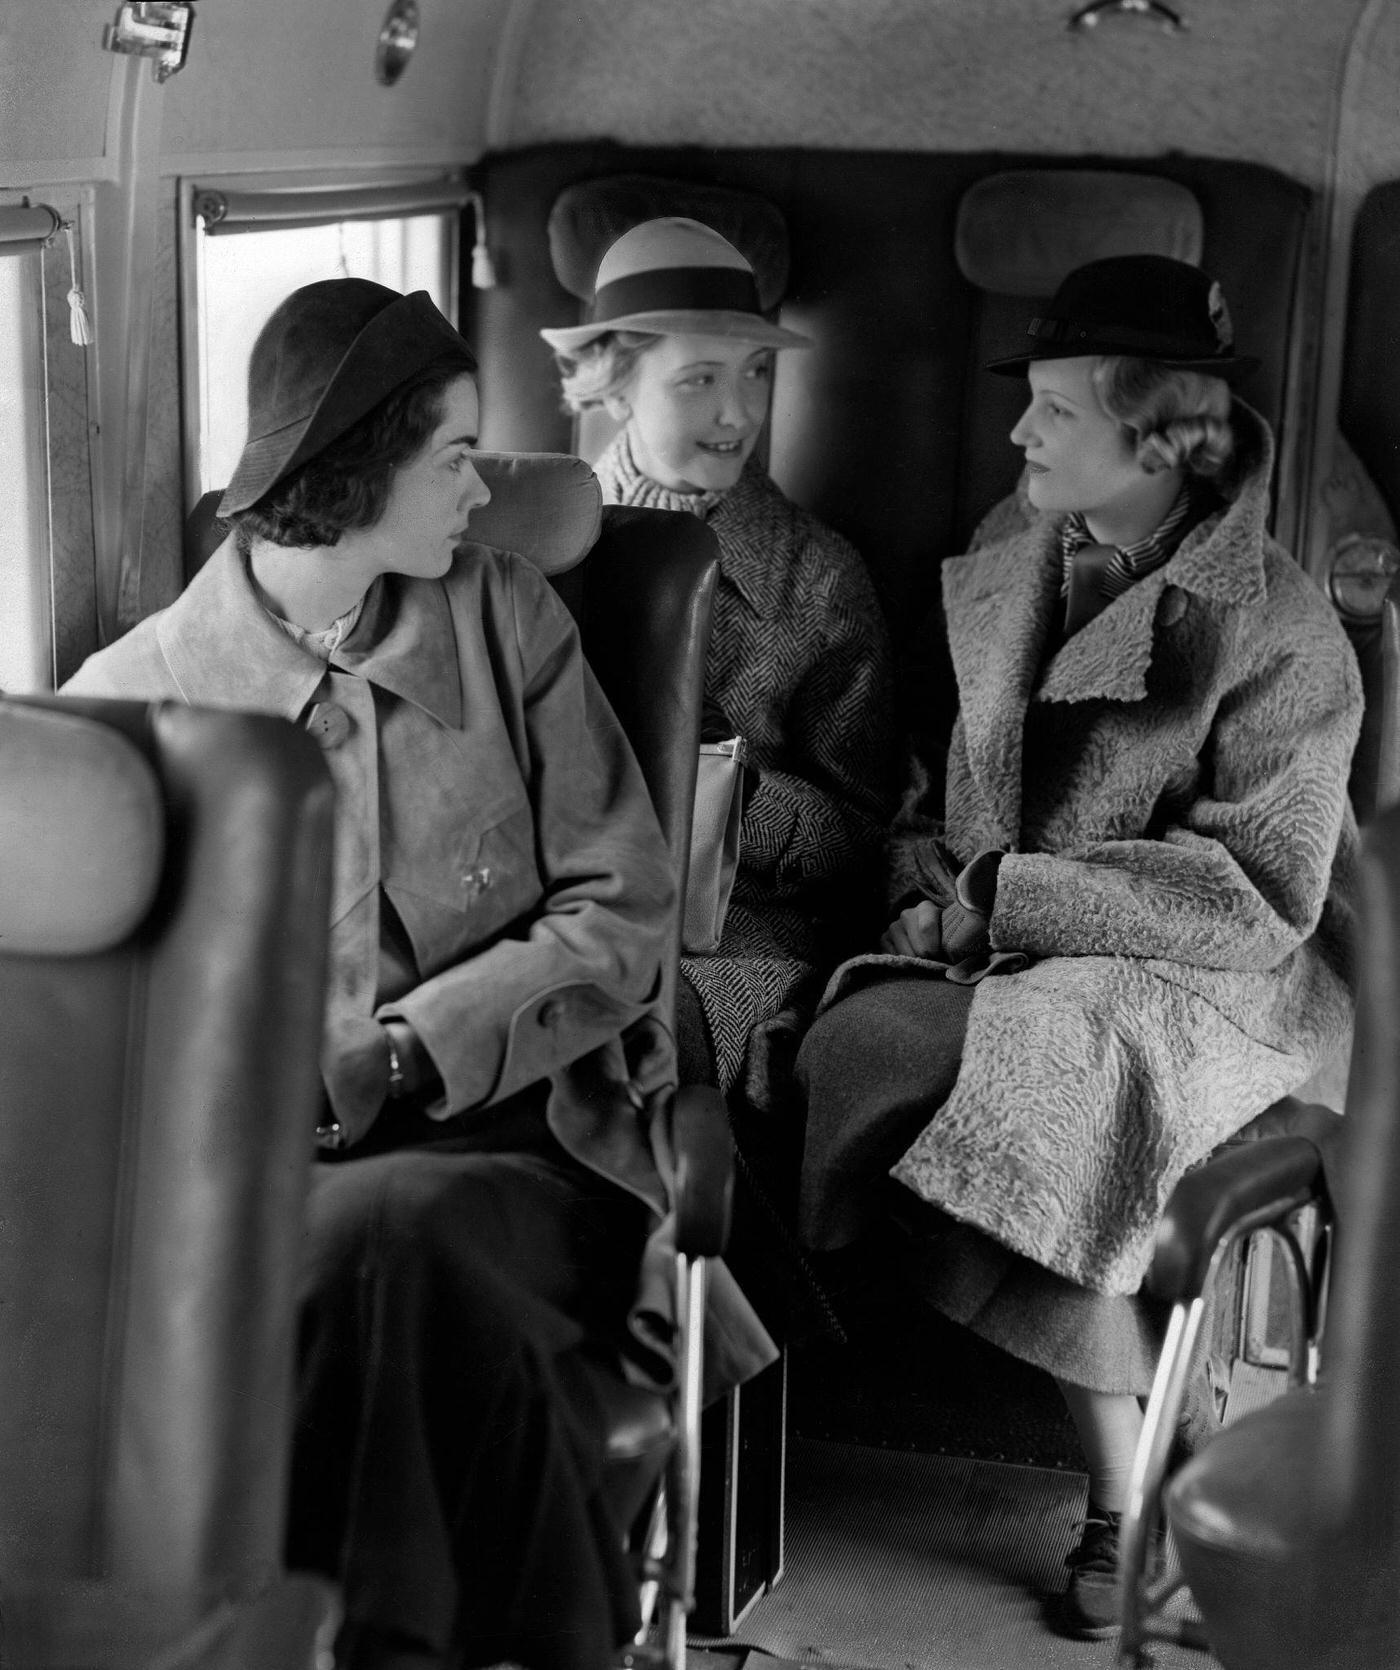 Germany: Passengers in an airplane, 1935.